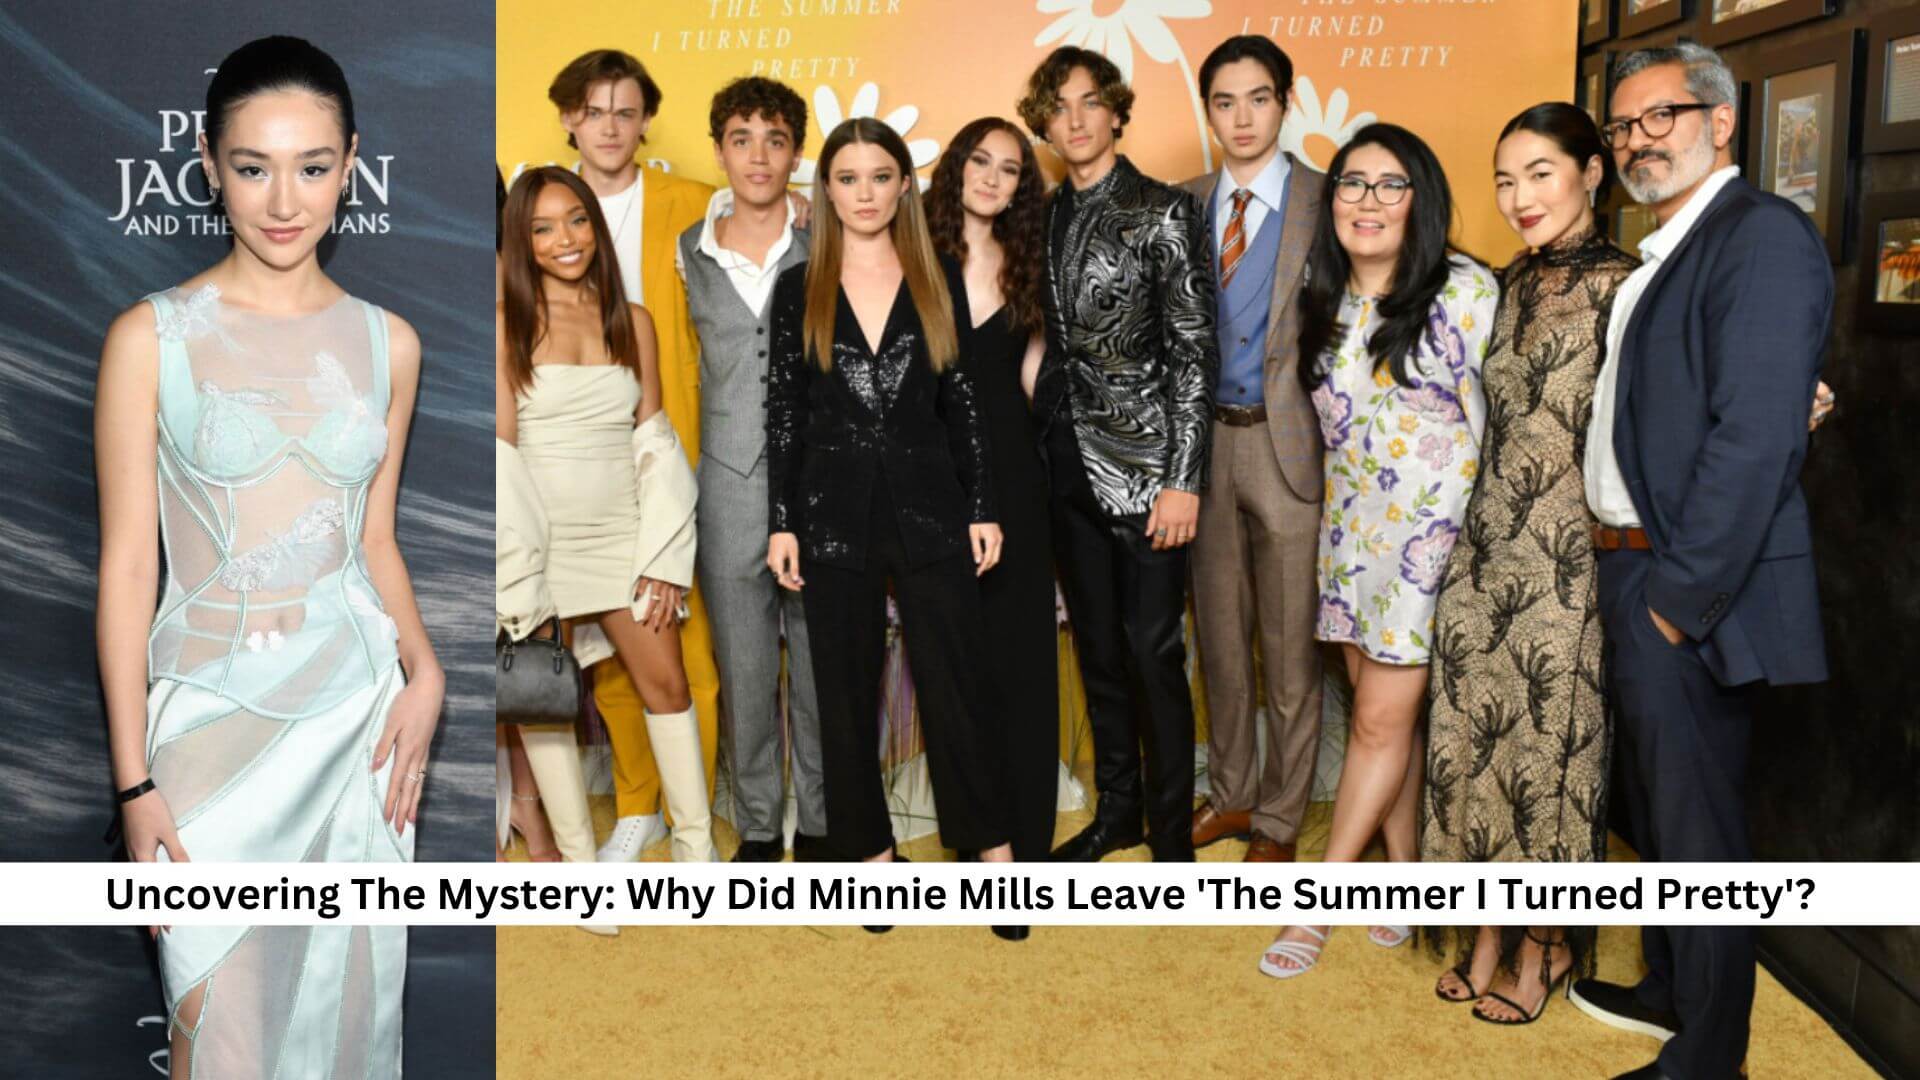 Uncovering The Mystery Why Did Minnie Mills Leave 'The Summer I Turned Pretty'